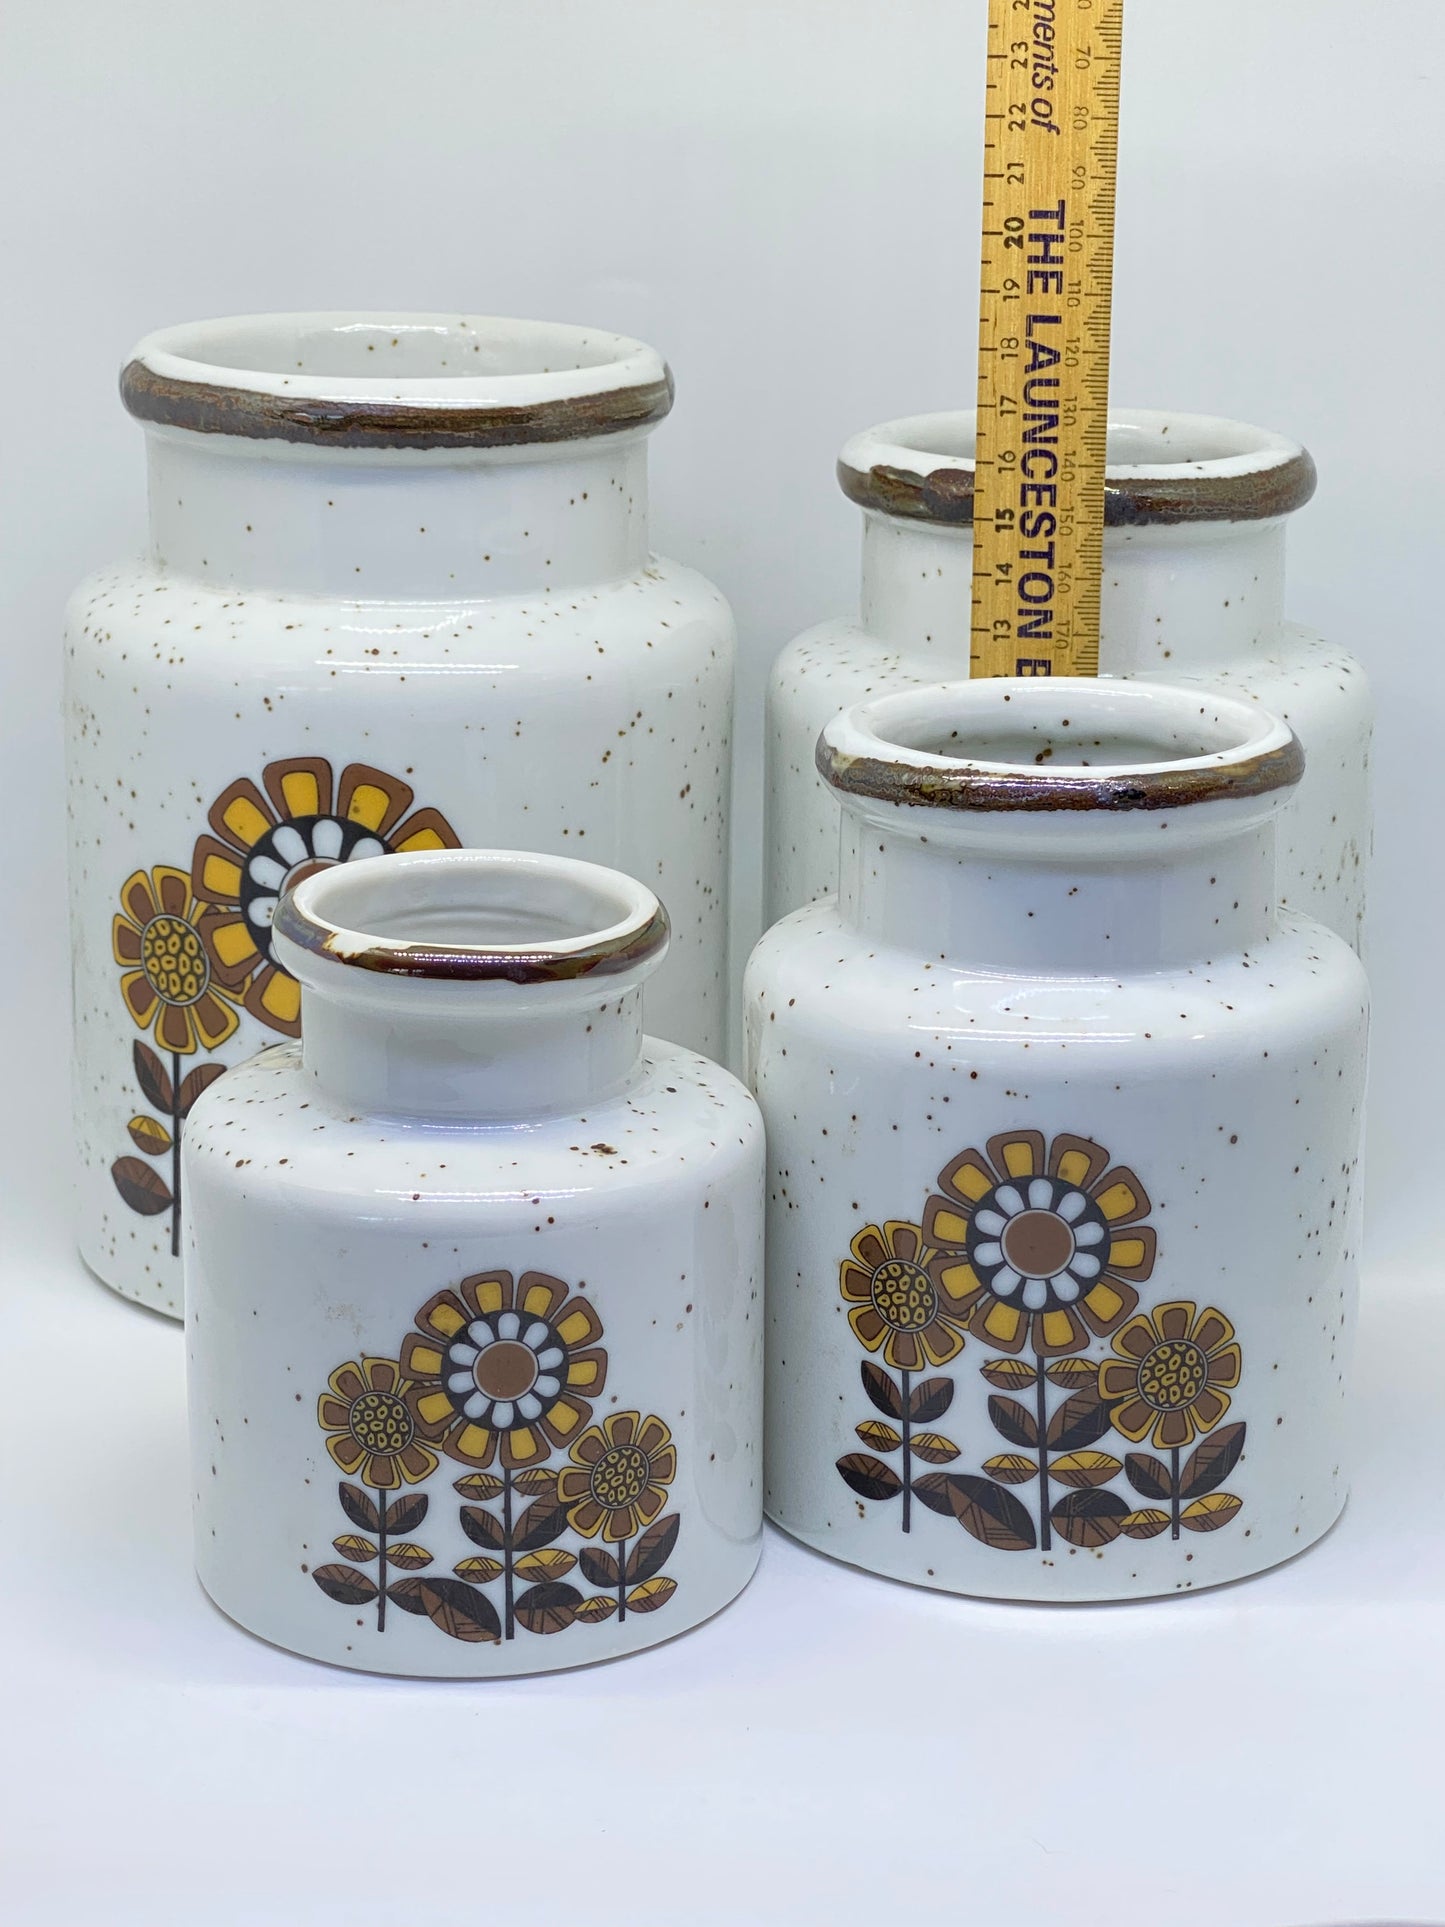 Set of Vintage 1970s/80s Japanese Ceramic Canisters without cork lids